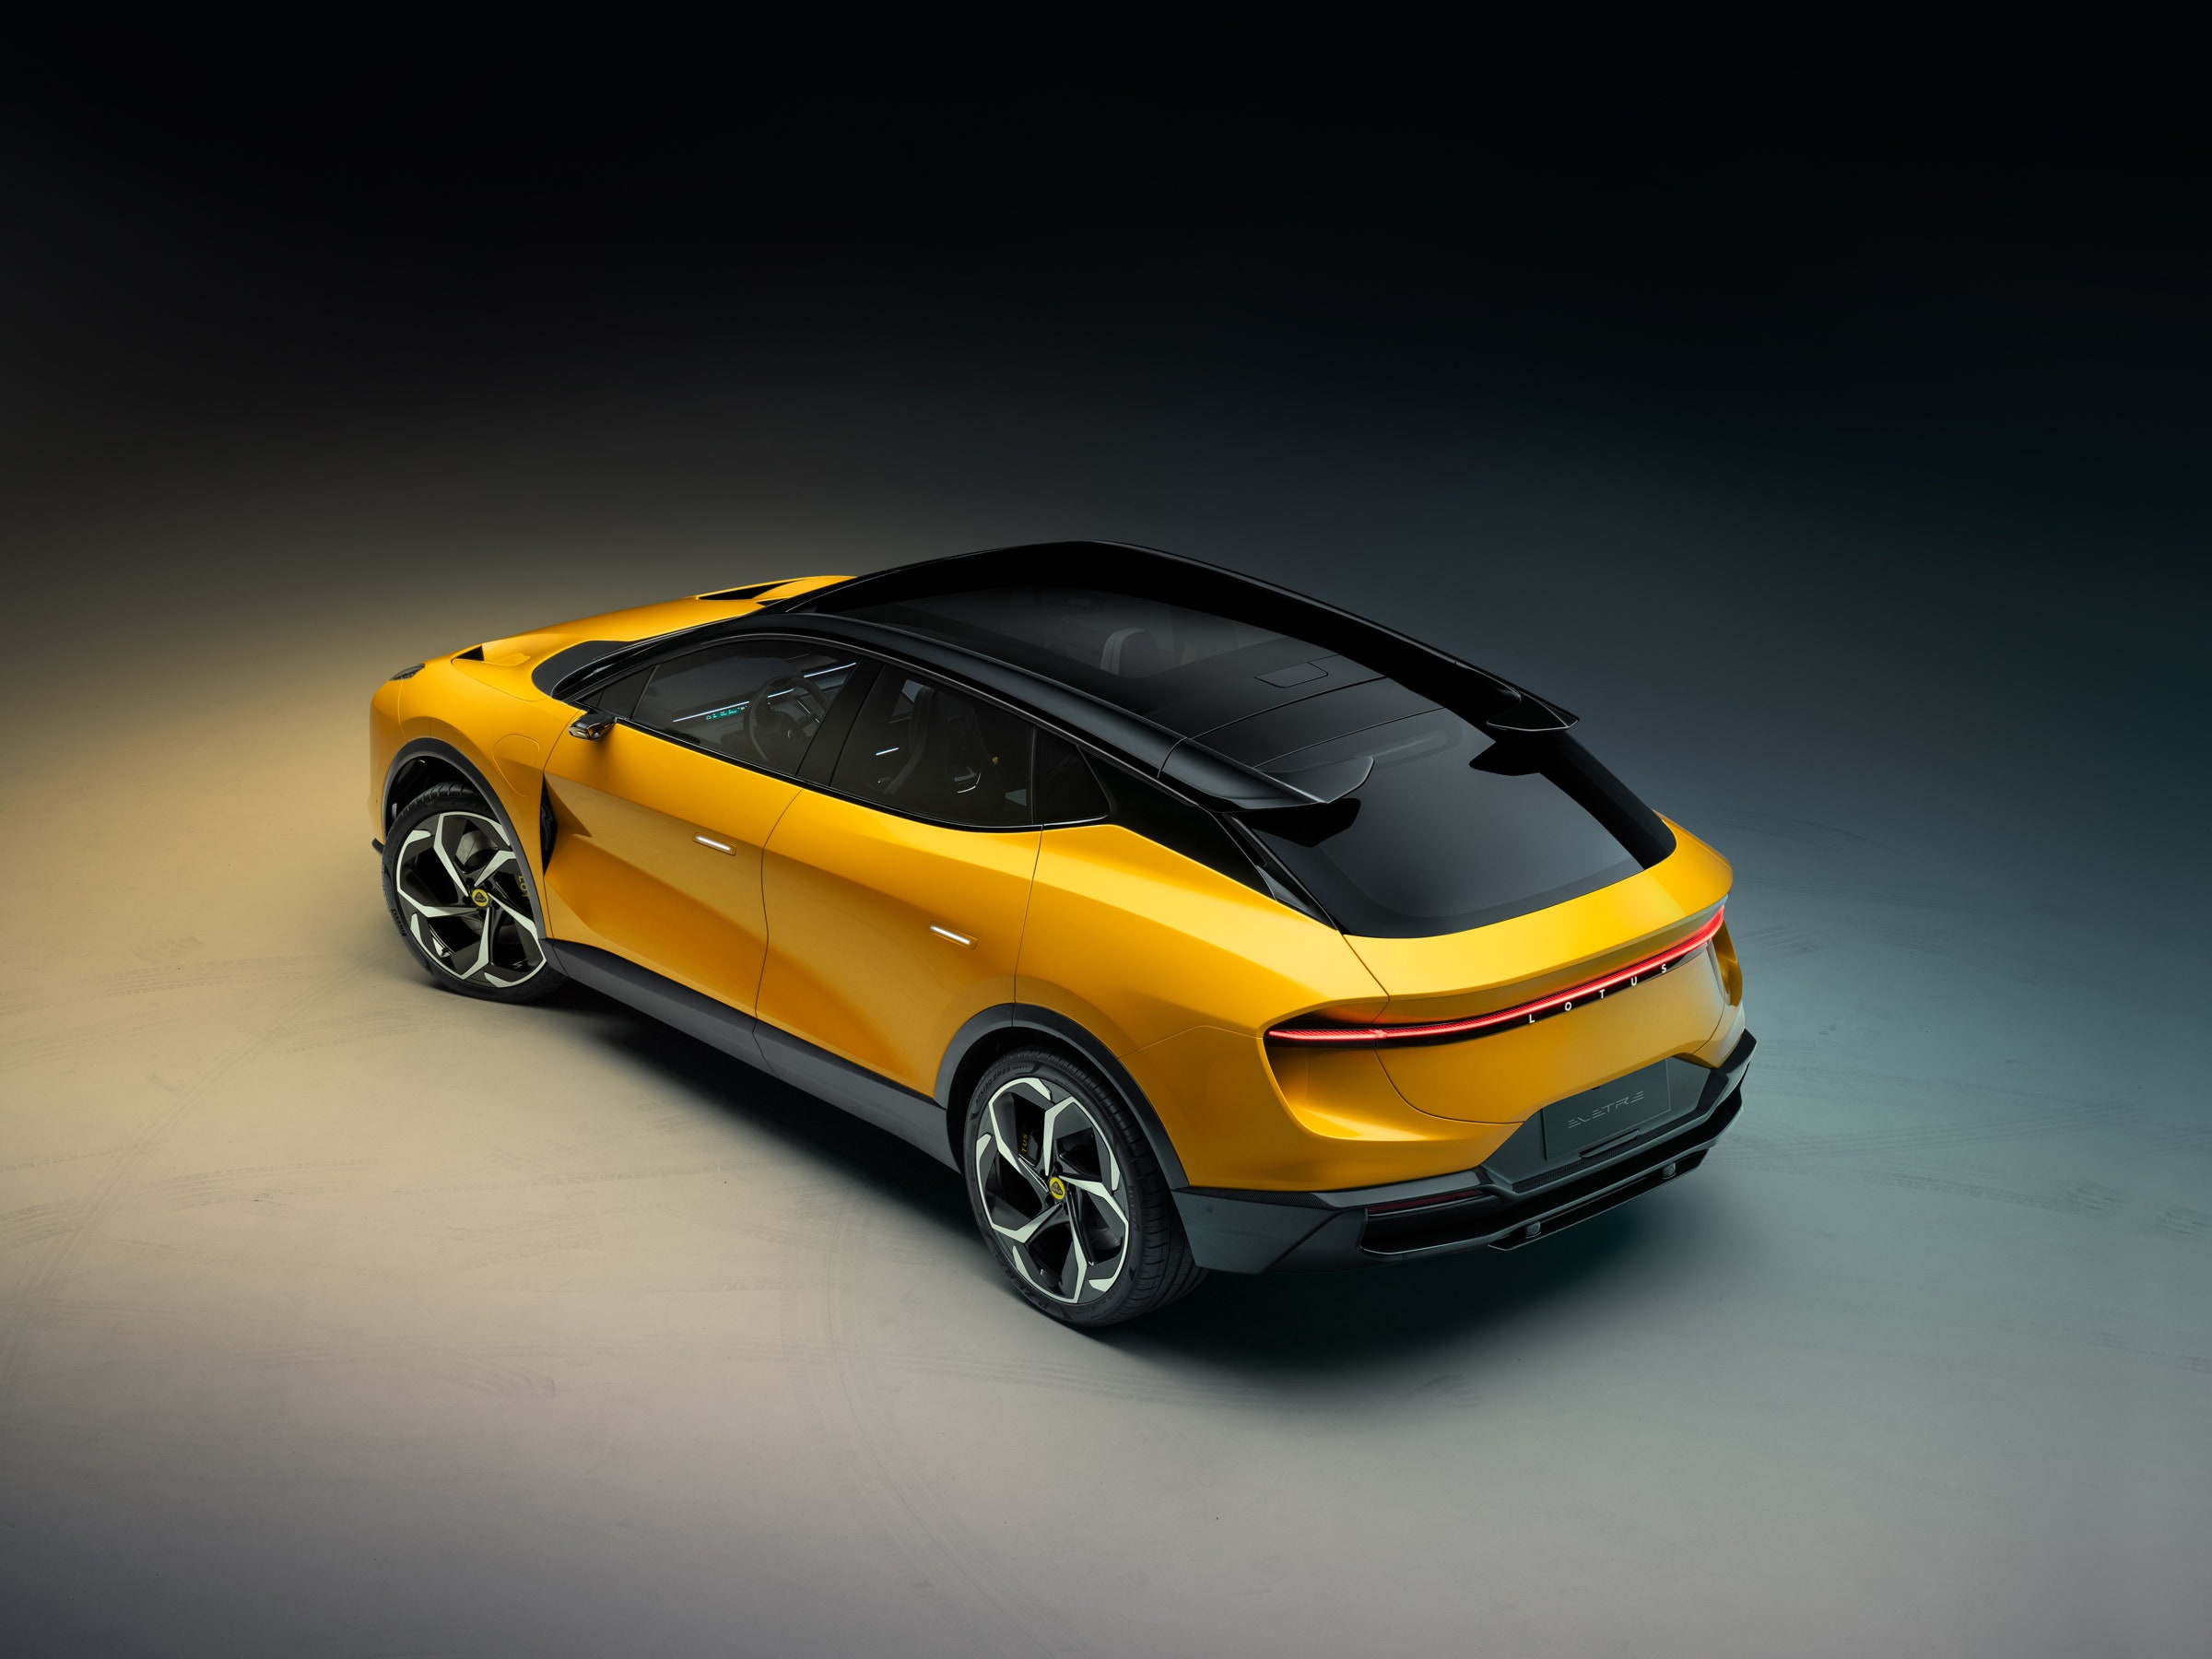 Lotus' All-Electric Eletre SUV Has a Grill That 'Breathes' | WIRED